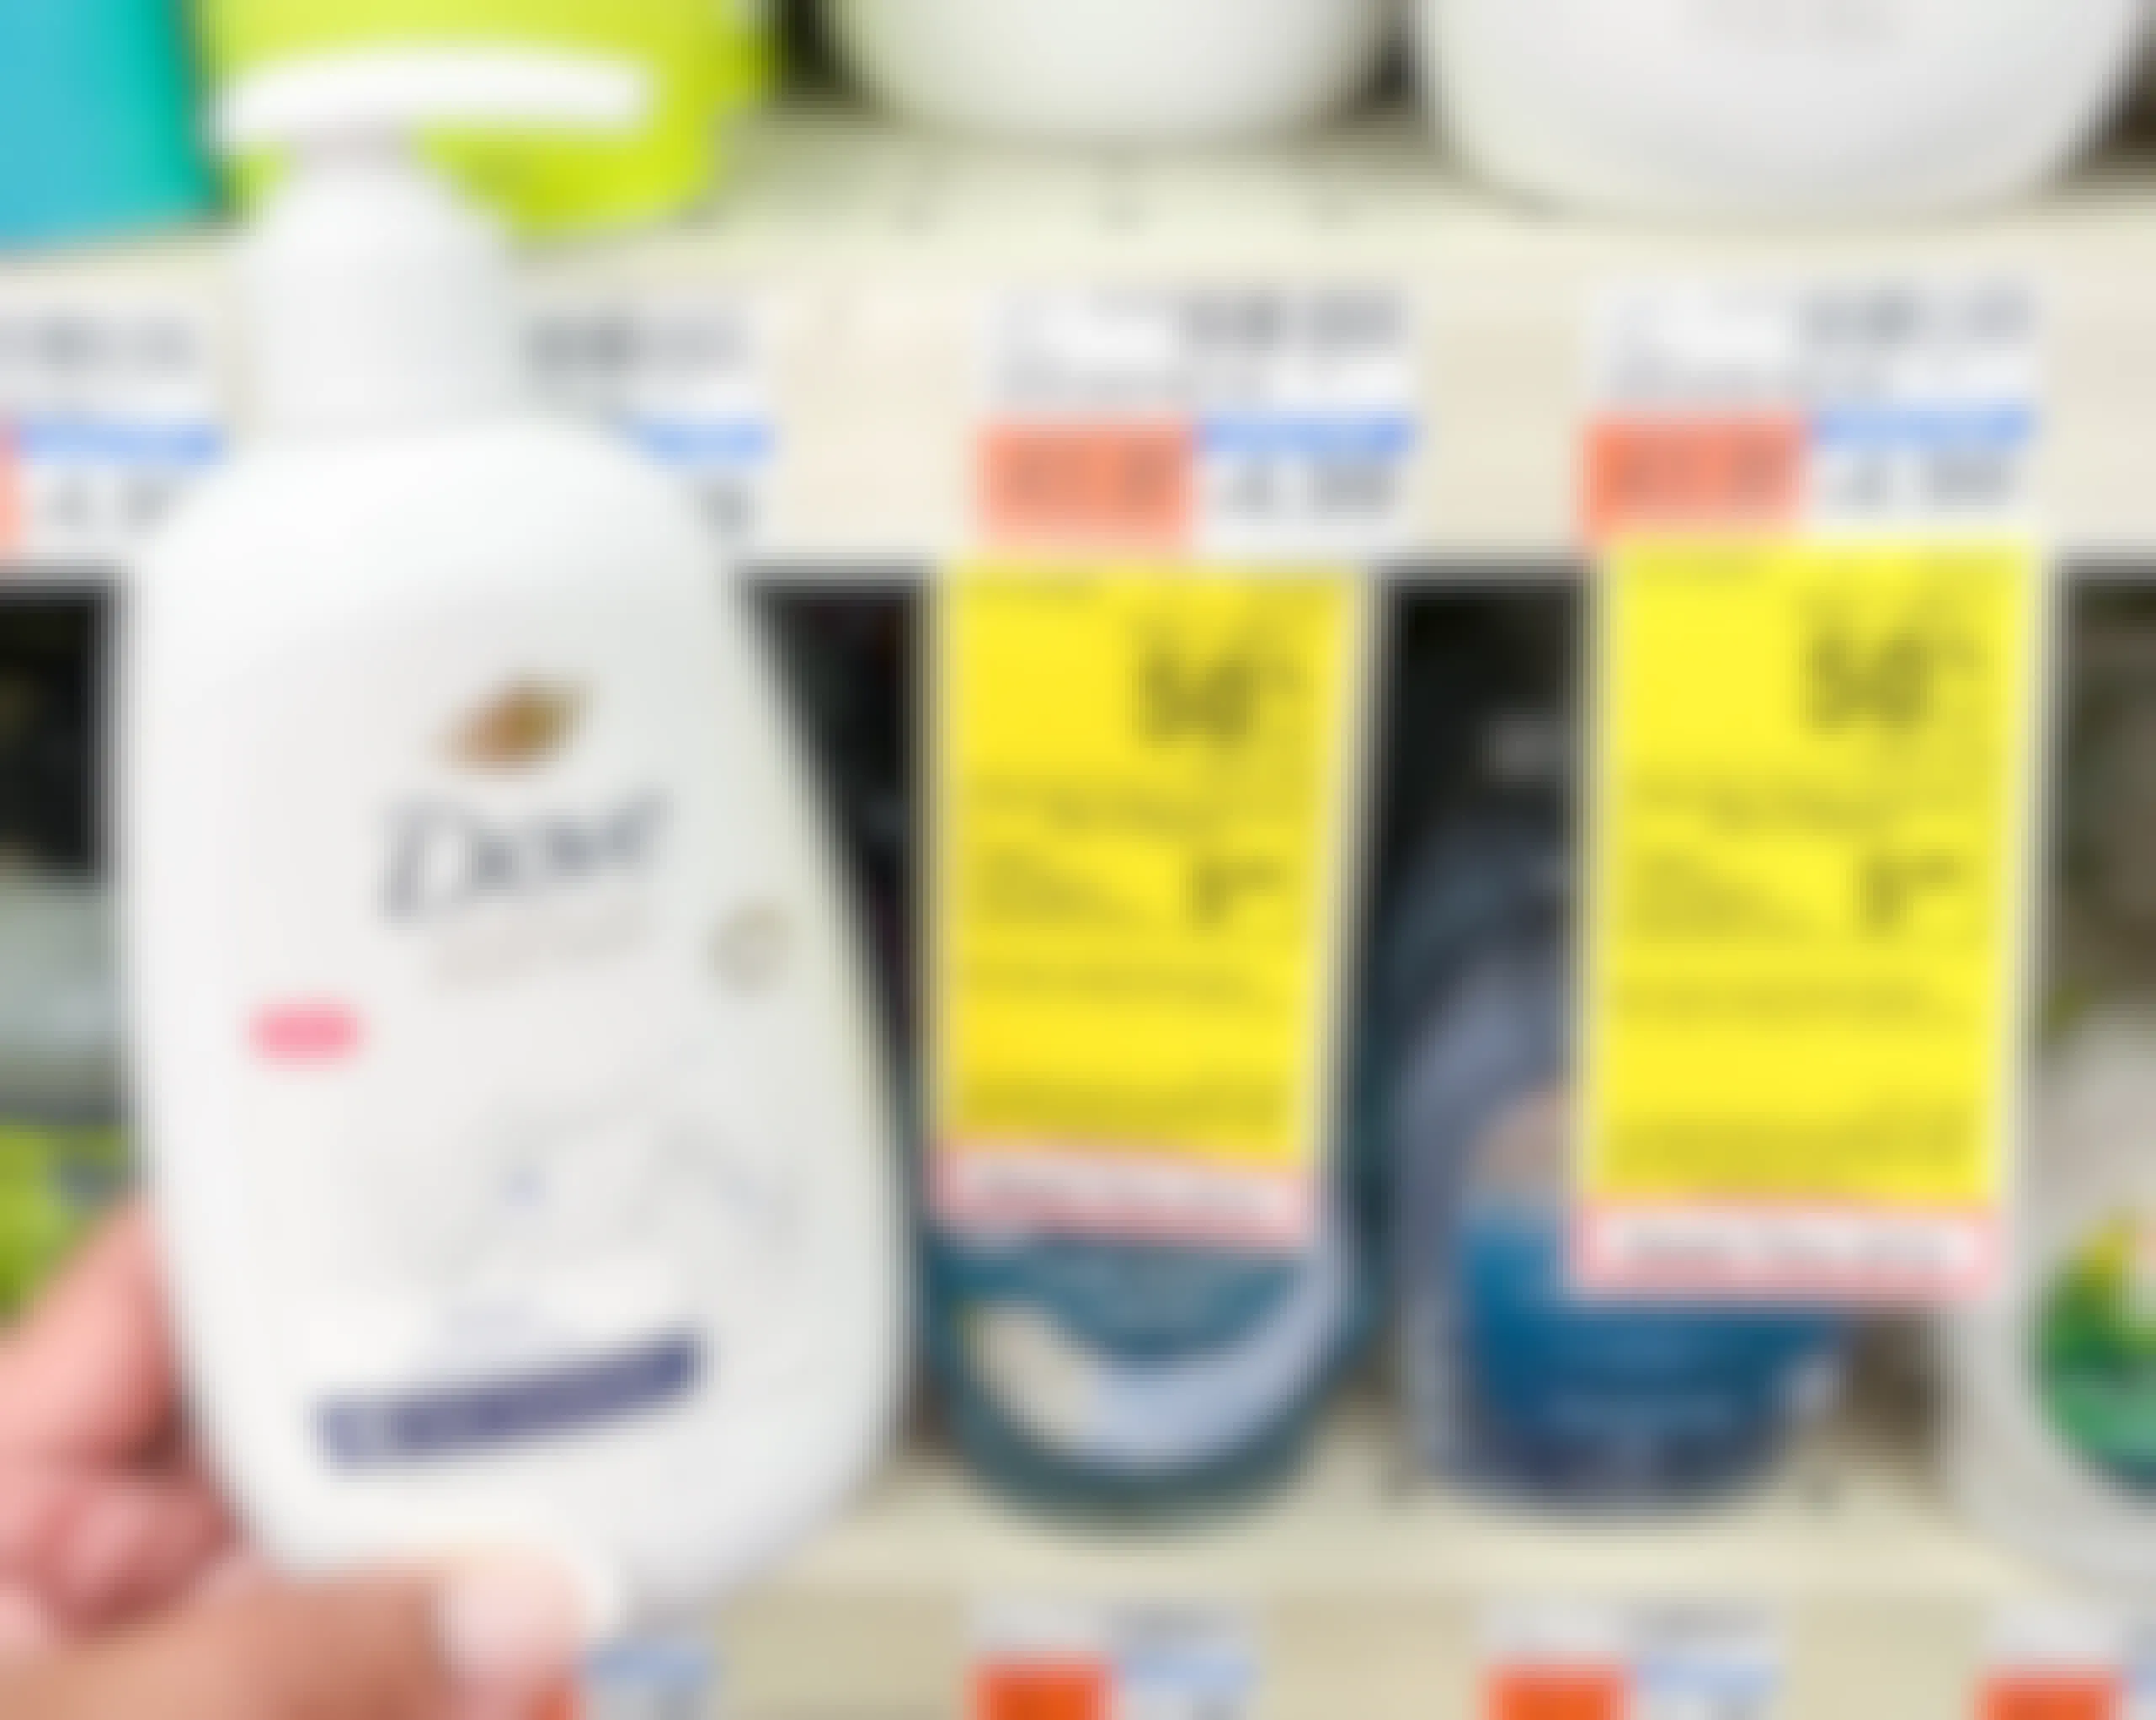 hand holding bottle of Dove hand wash next to sales tag